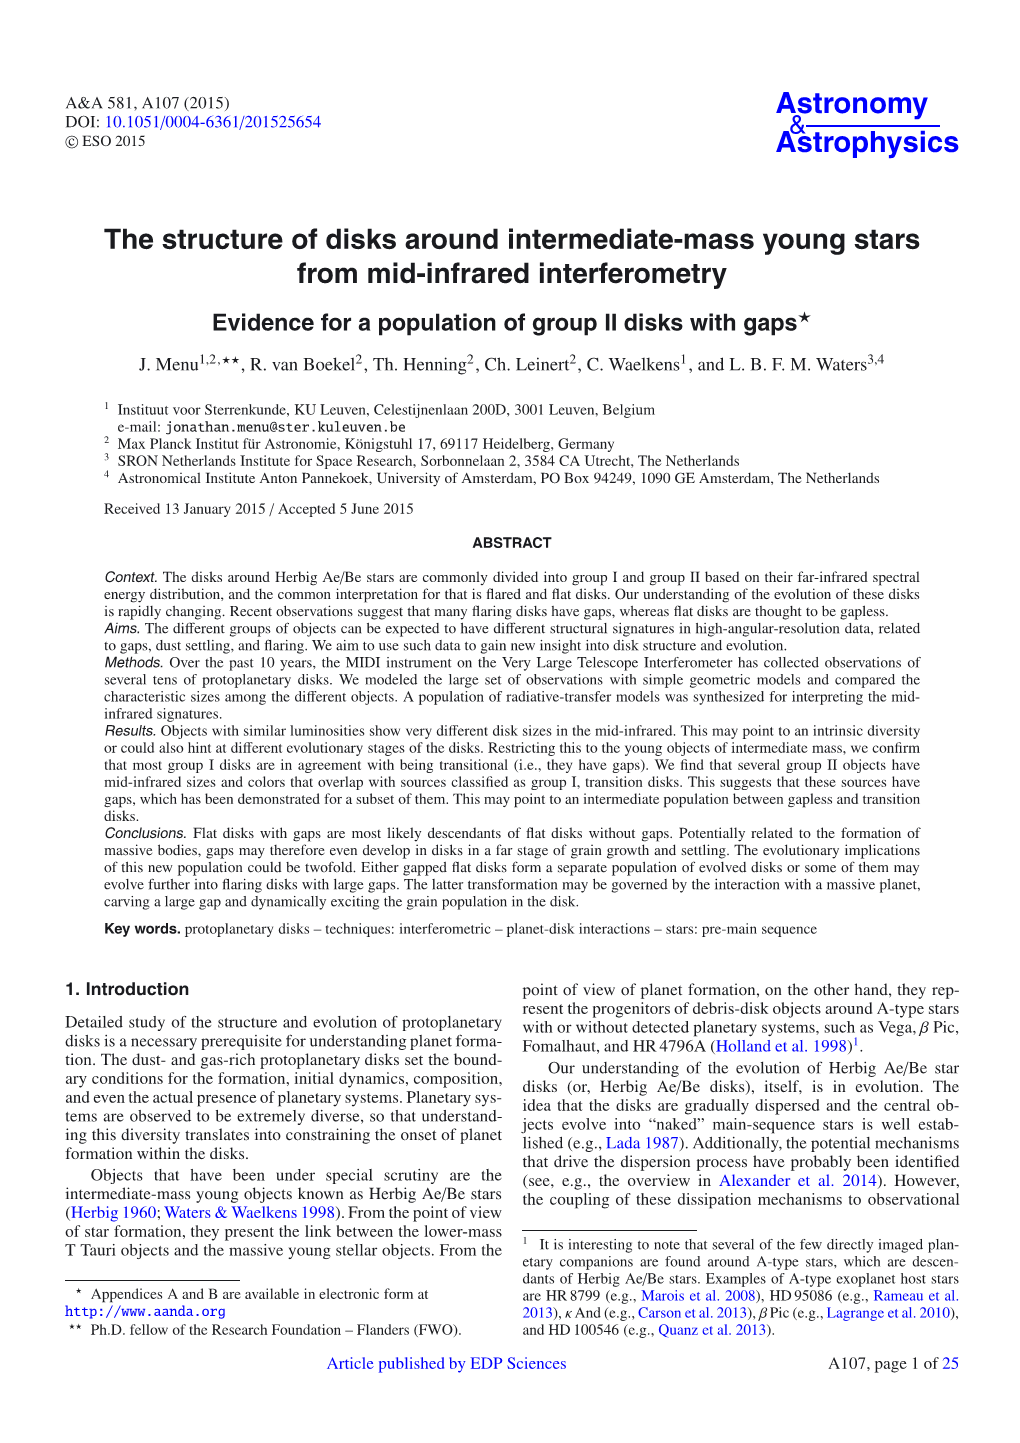 The Structure of Disks Around Intermediate-Mass Young Stars from Mid-Infrared Interferometry Evidence for a Population of Group II Disks with Gaps